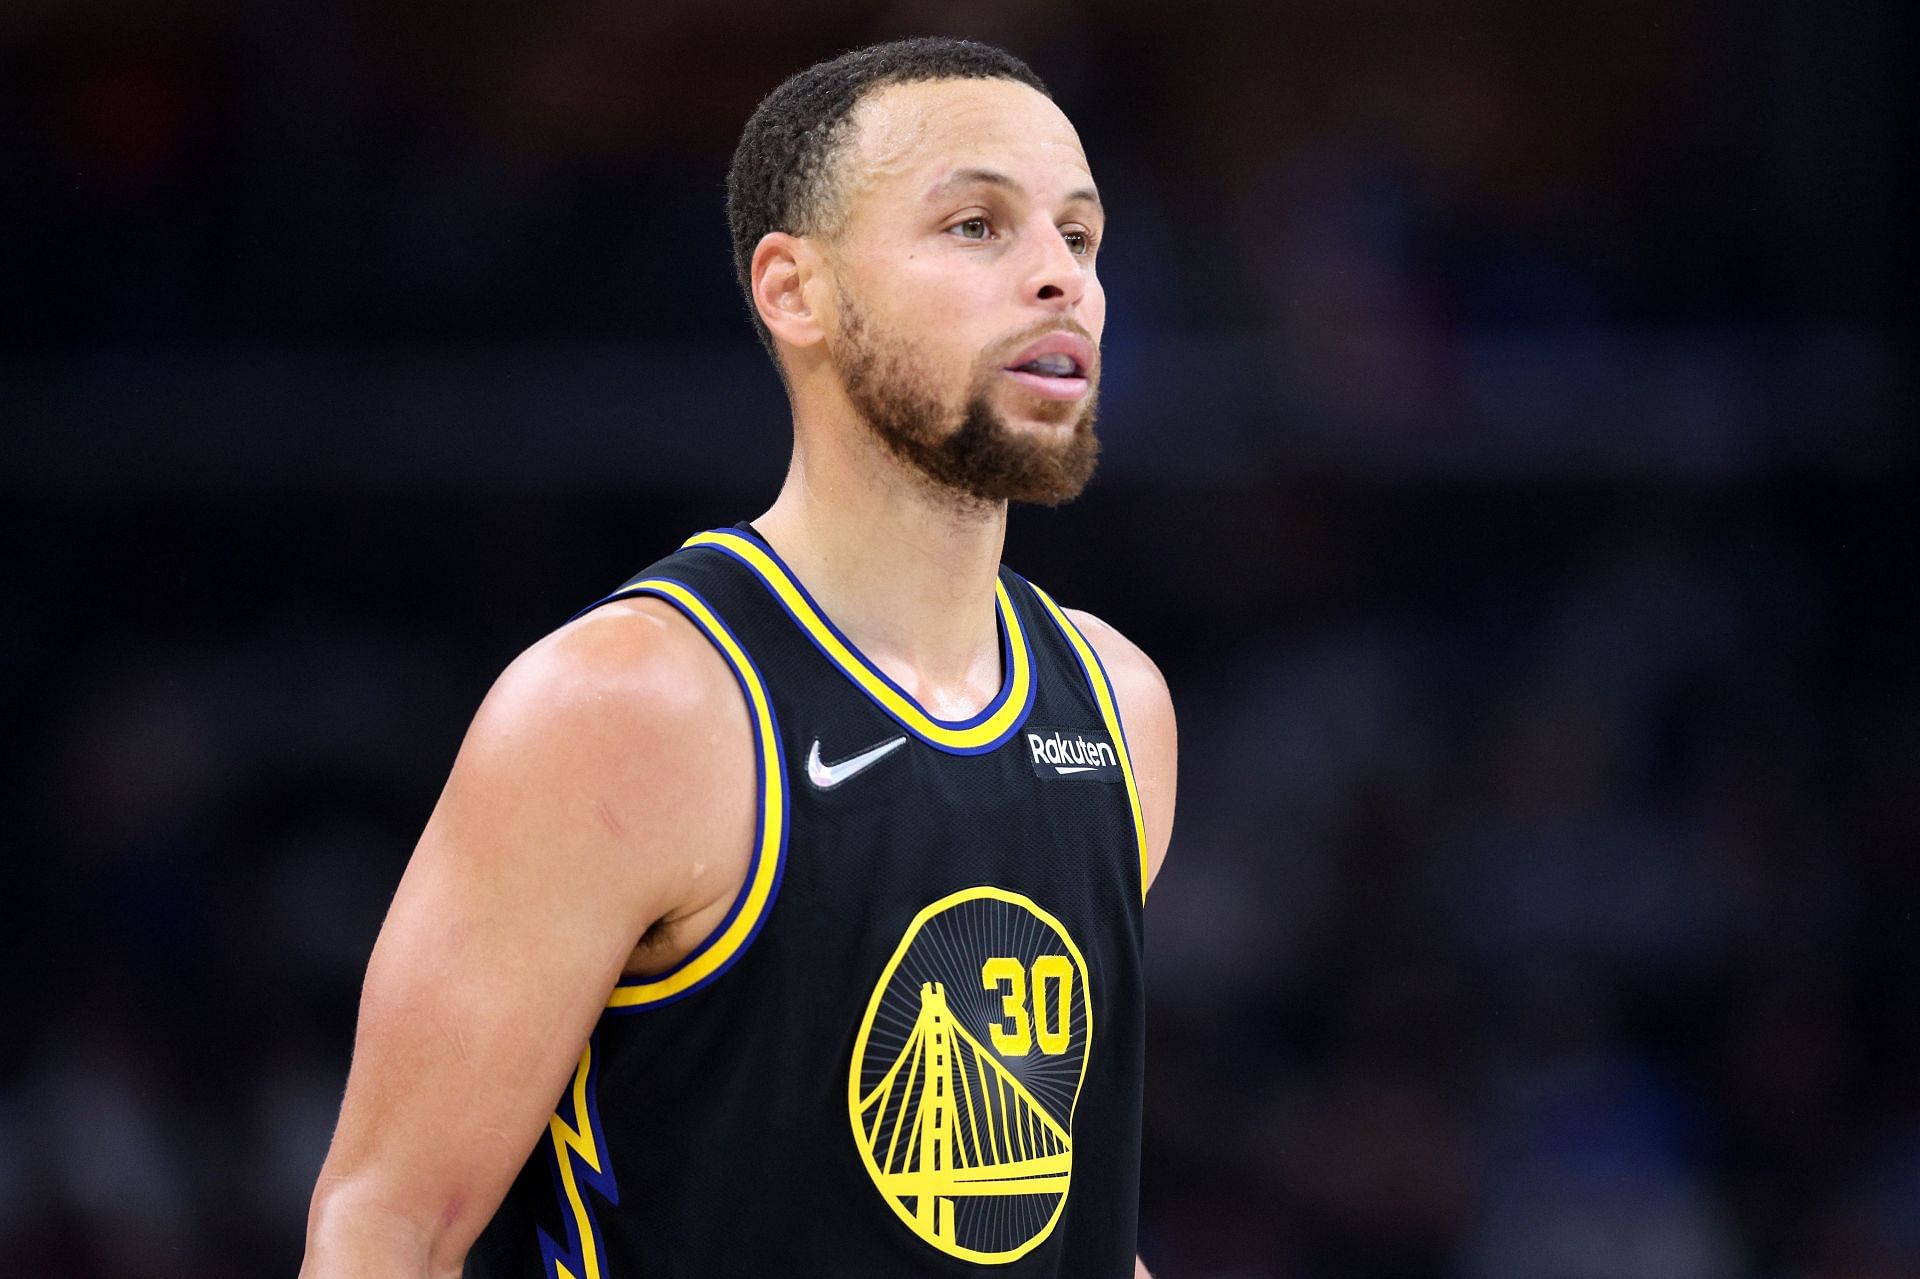 Stephen Curry is the highest-paid NBA player in terms of salary